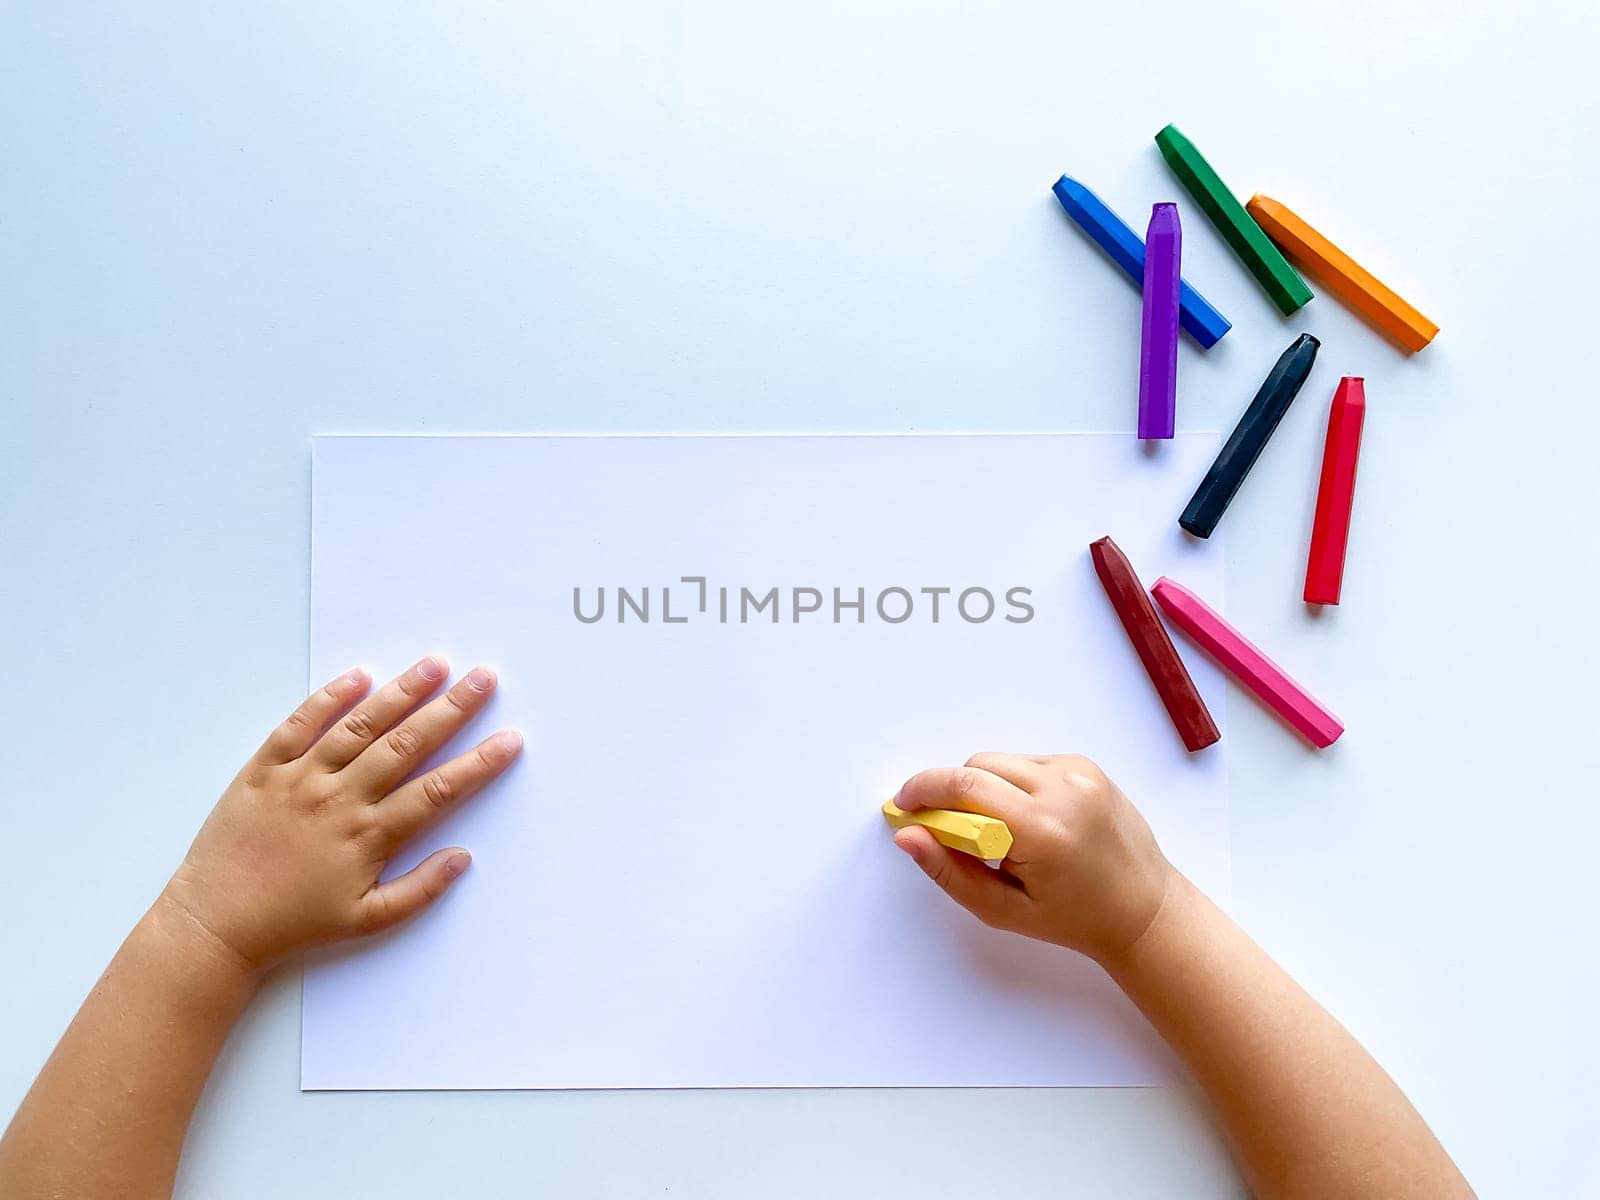 Childrens hands draw with colored wax crayons on a white sheet of paper. Top view of a blank sheet. by Lunnica